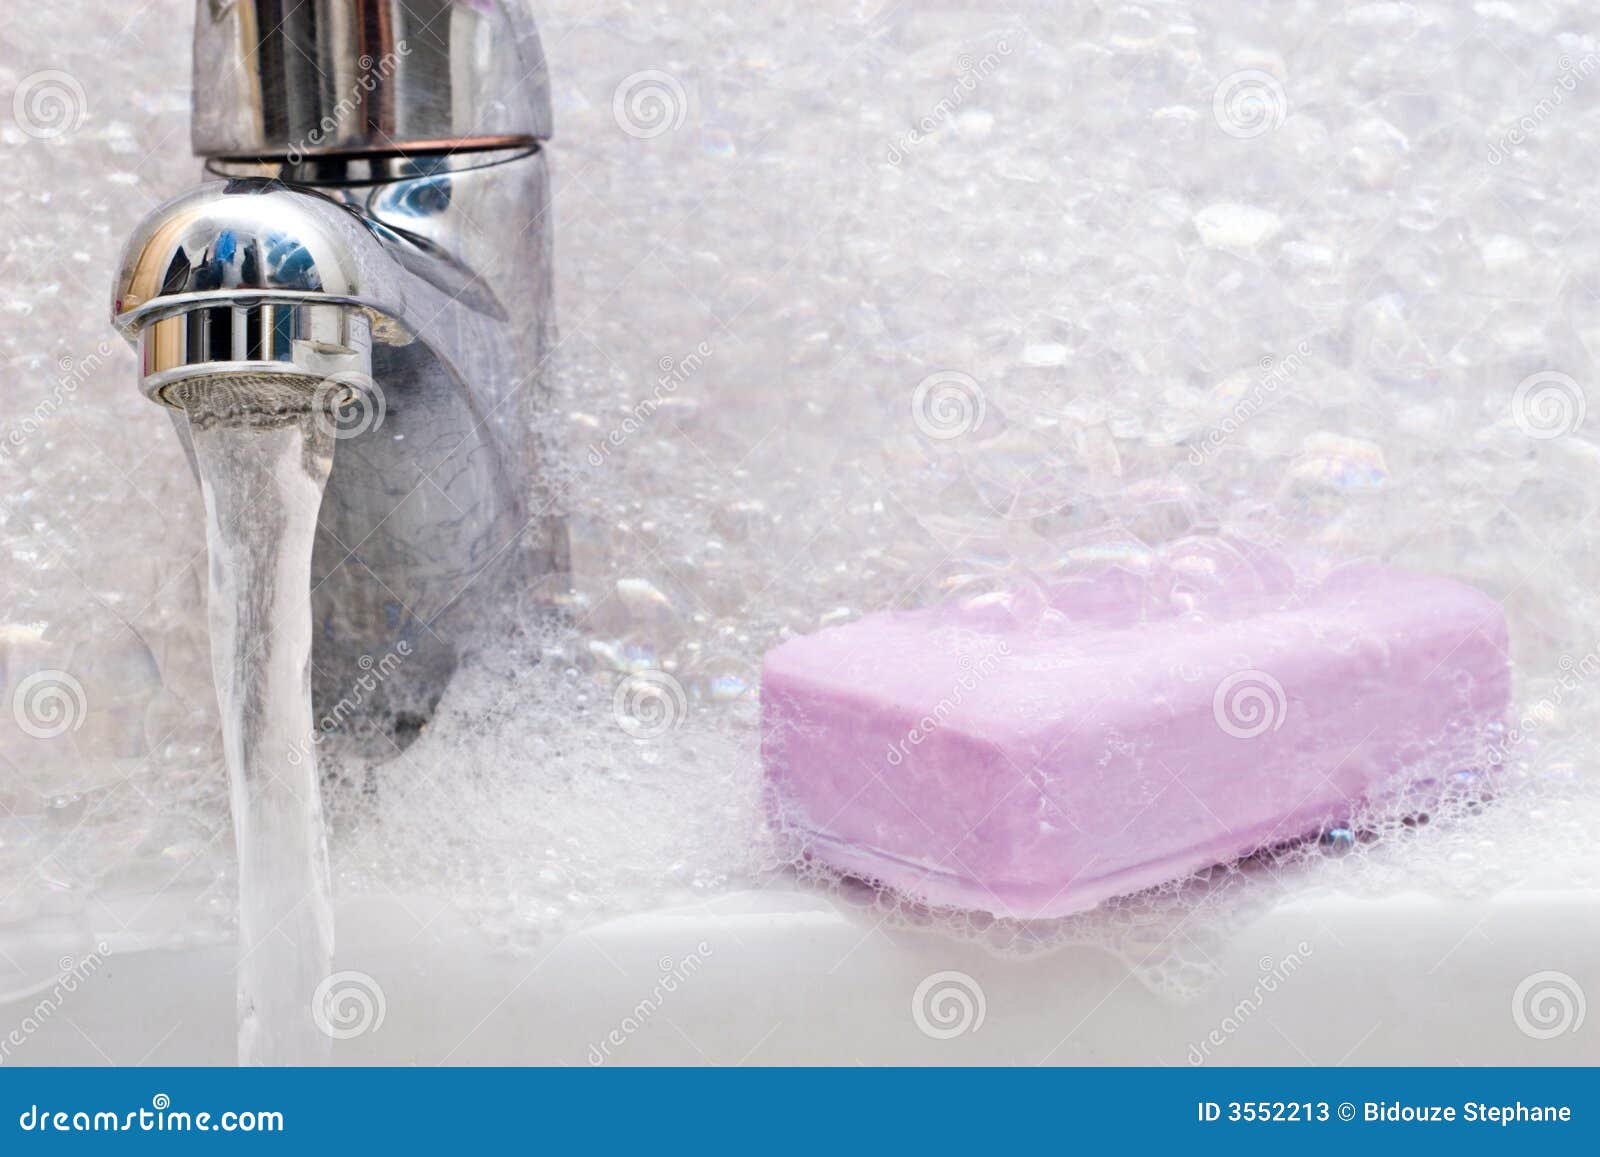 Soap And Sink In Foam Stock Photos - Image: 3552213